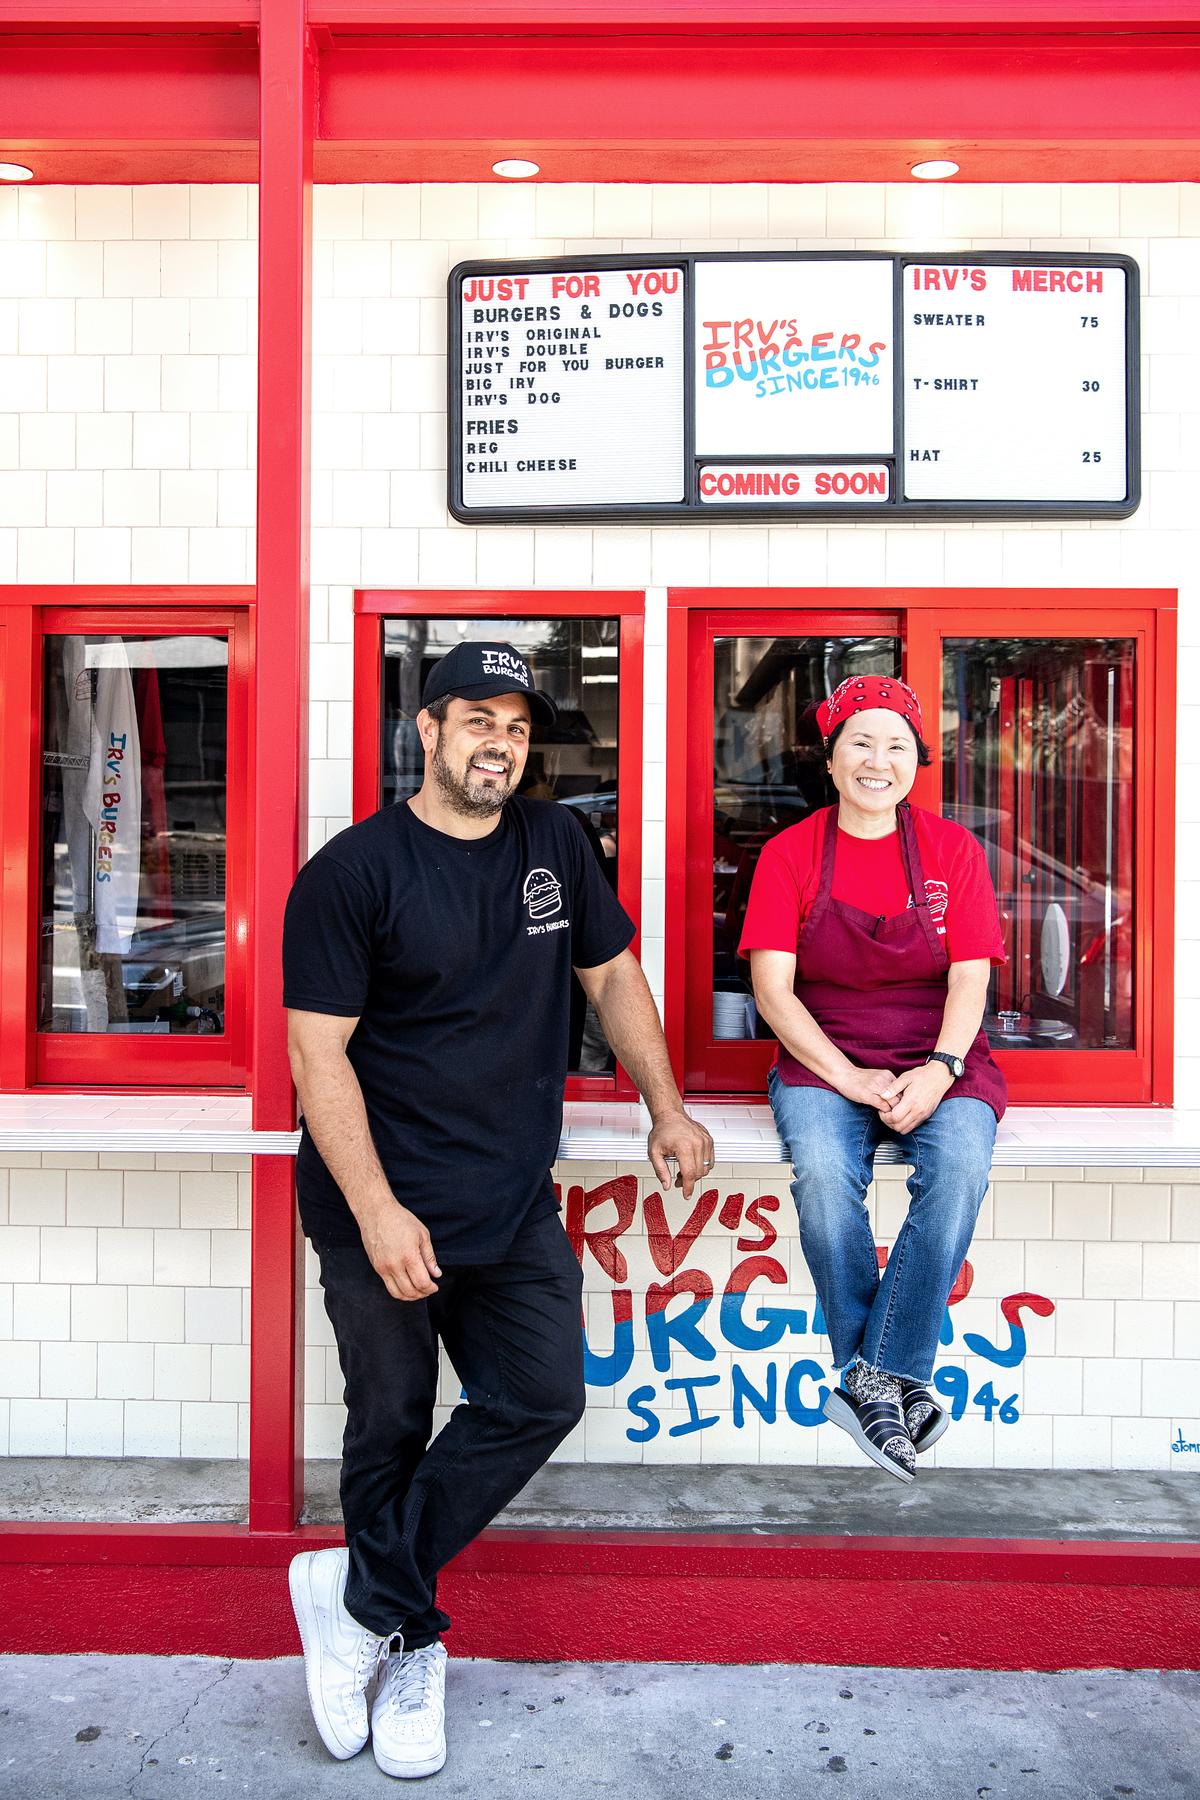 Lawrence Longo, left, approached former Irv’s owner Sonia Hong with an offer to help her reopen the business. She’d only return if she wasn’t the owner, she told him. (Mariah Tauger/Los Angeles Times/TNS)